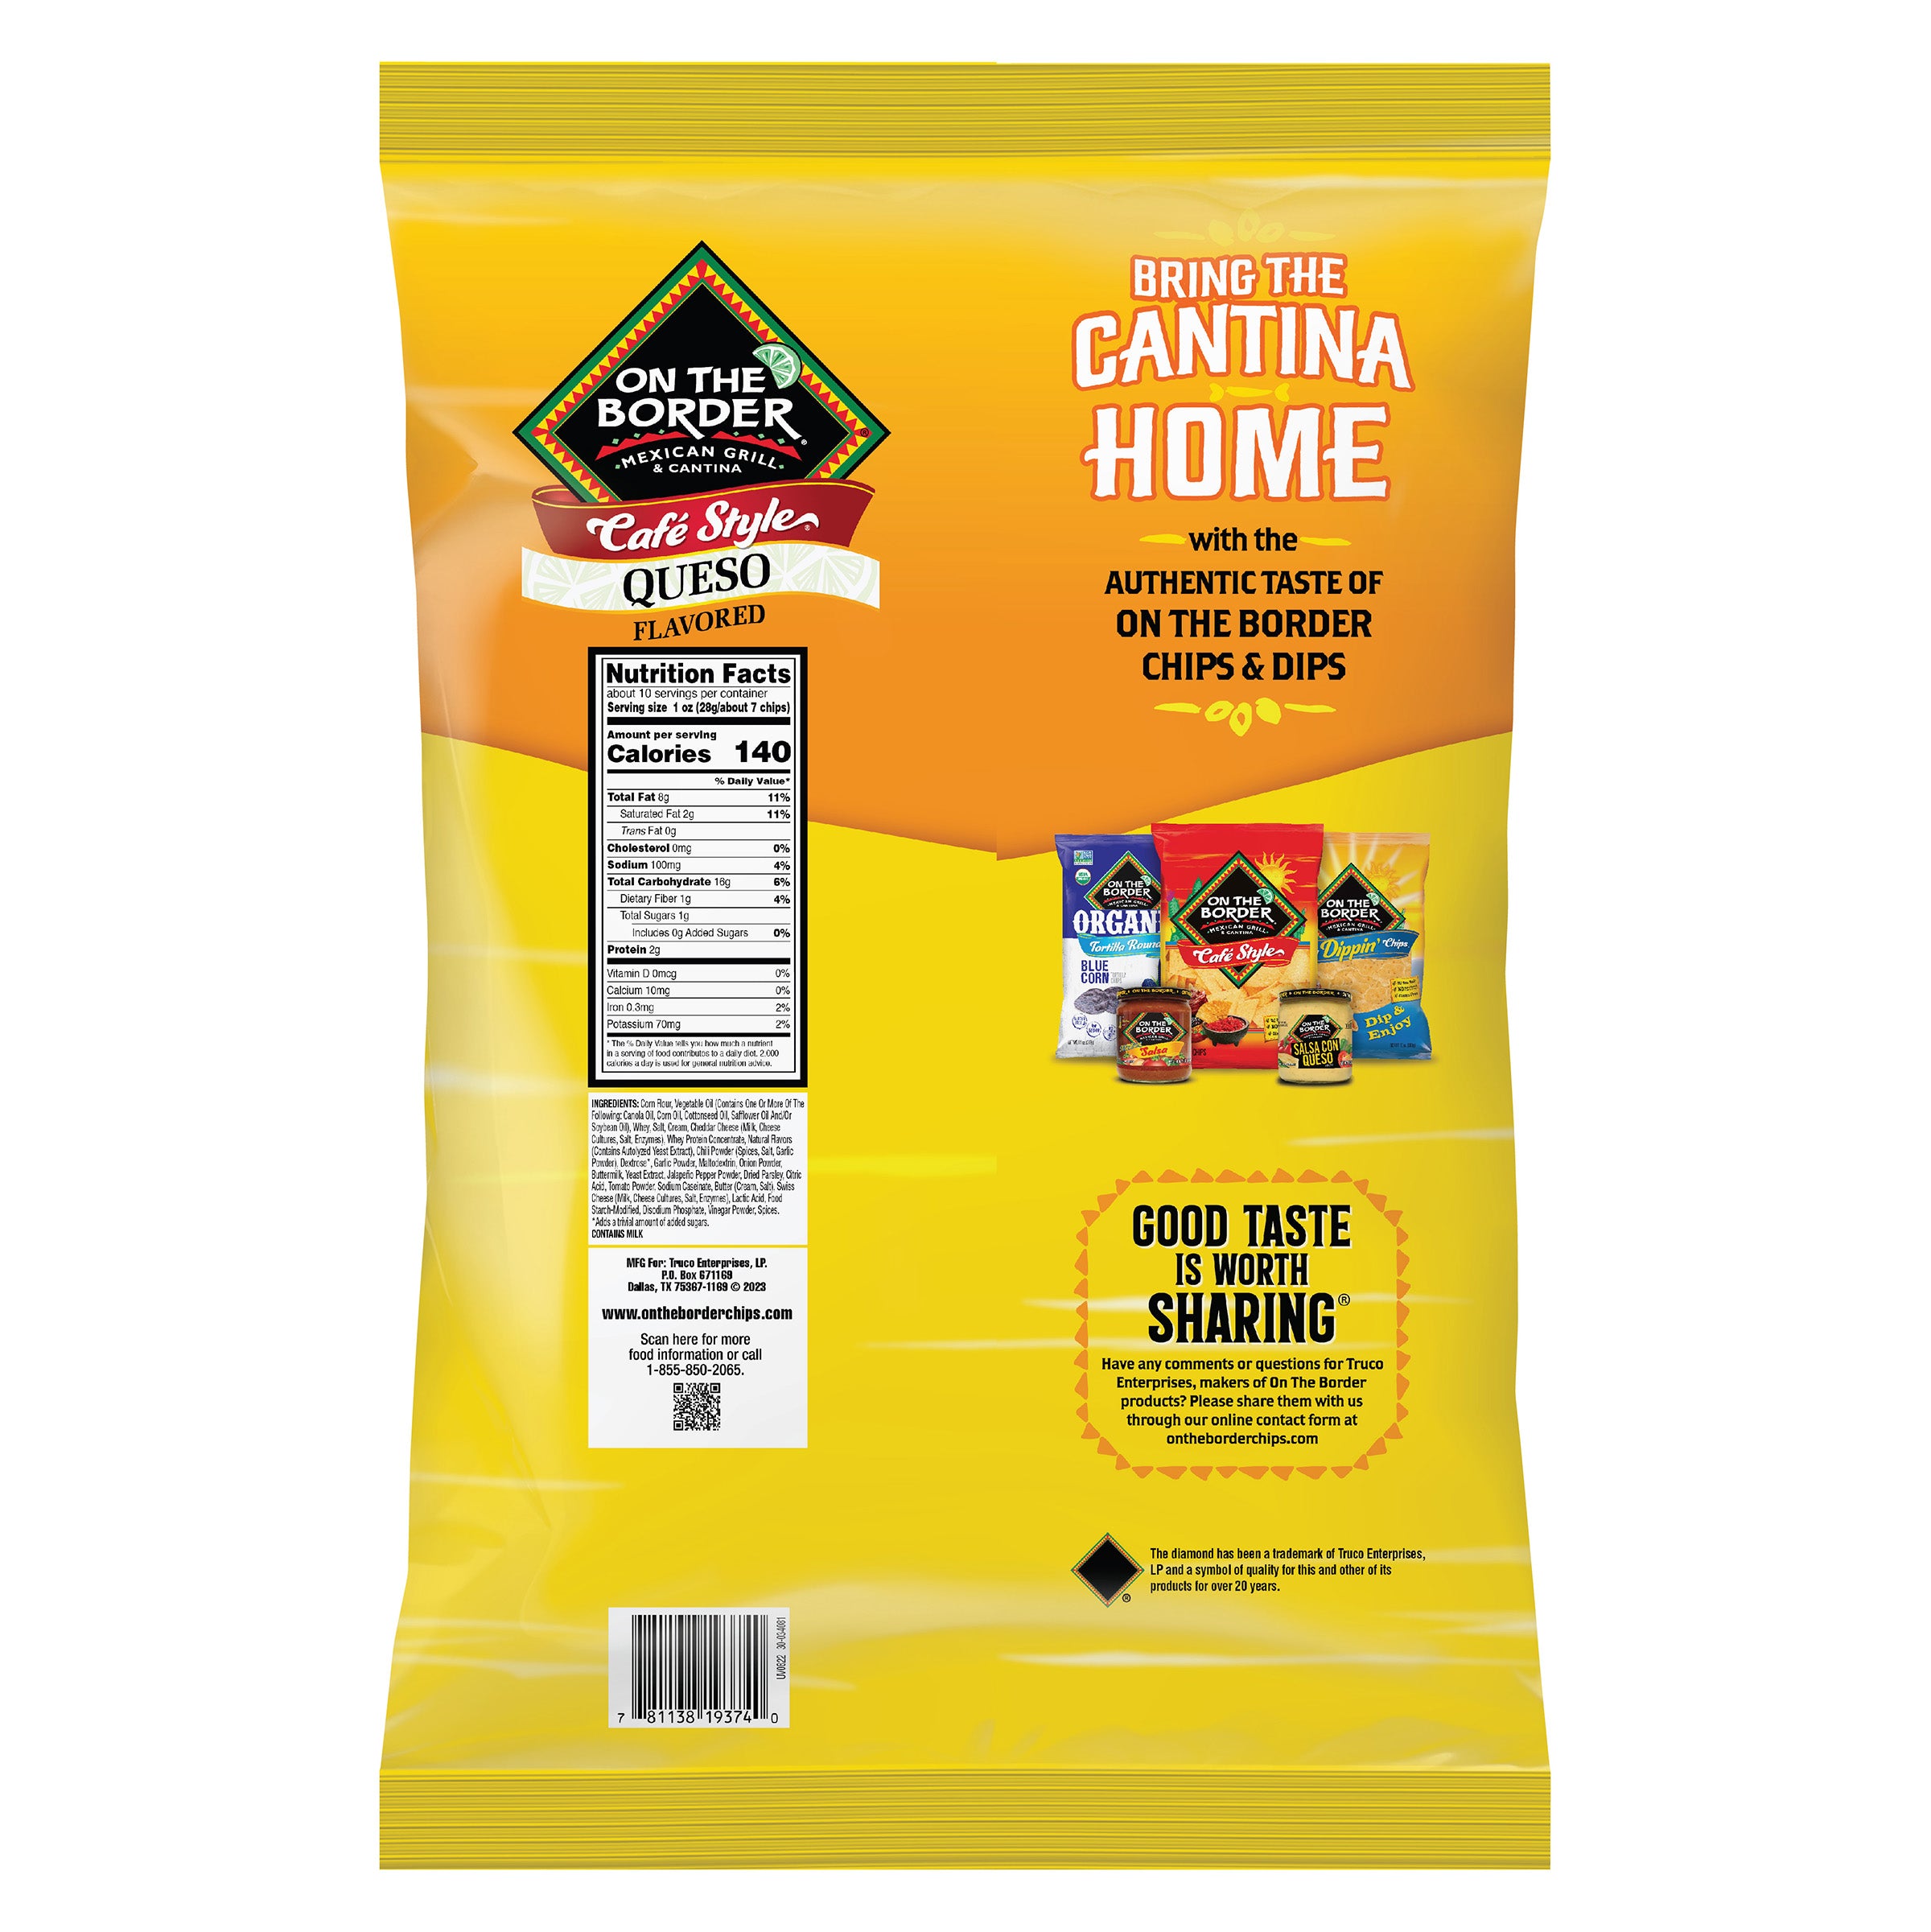 ON THE BORDER Cafe Tortilla Chips, 12 Ounce